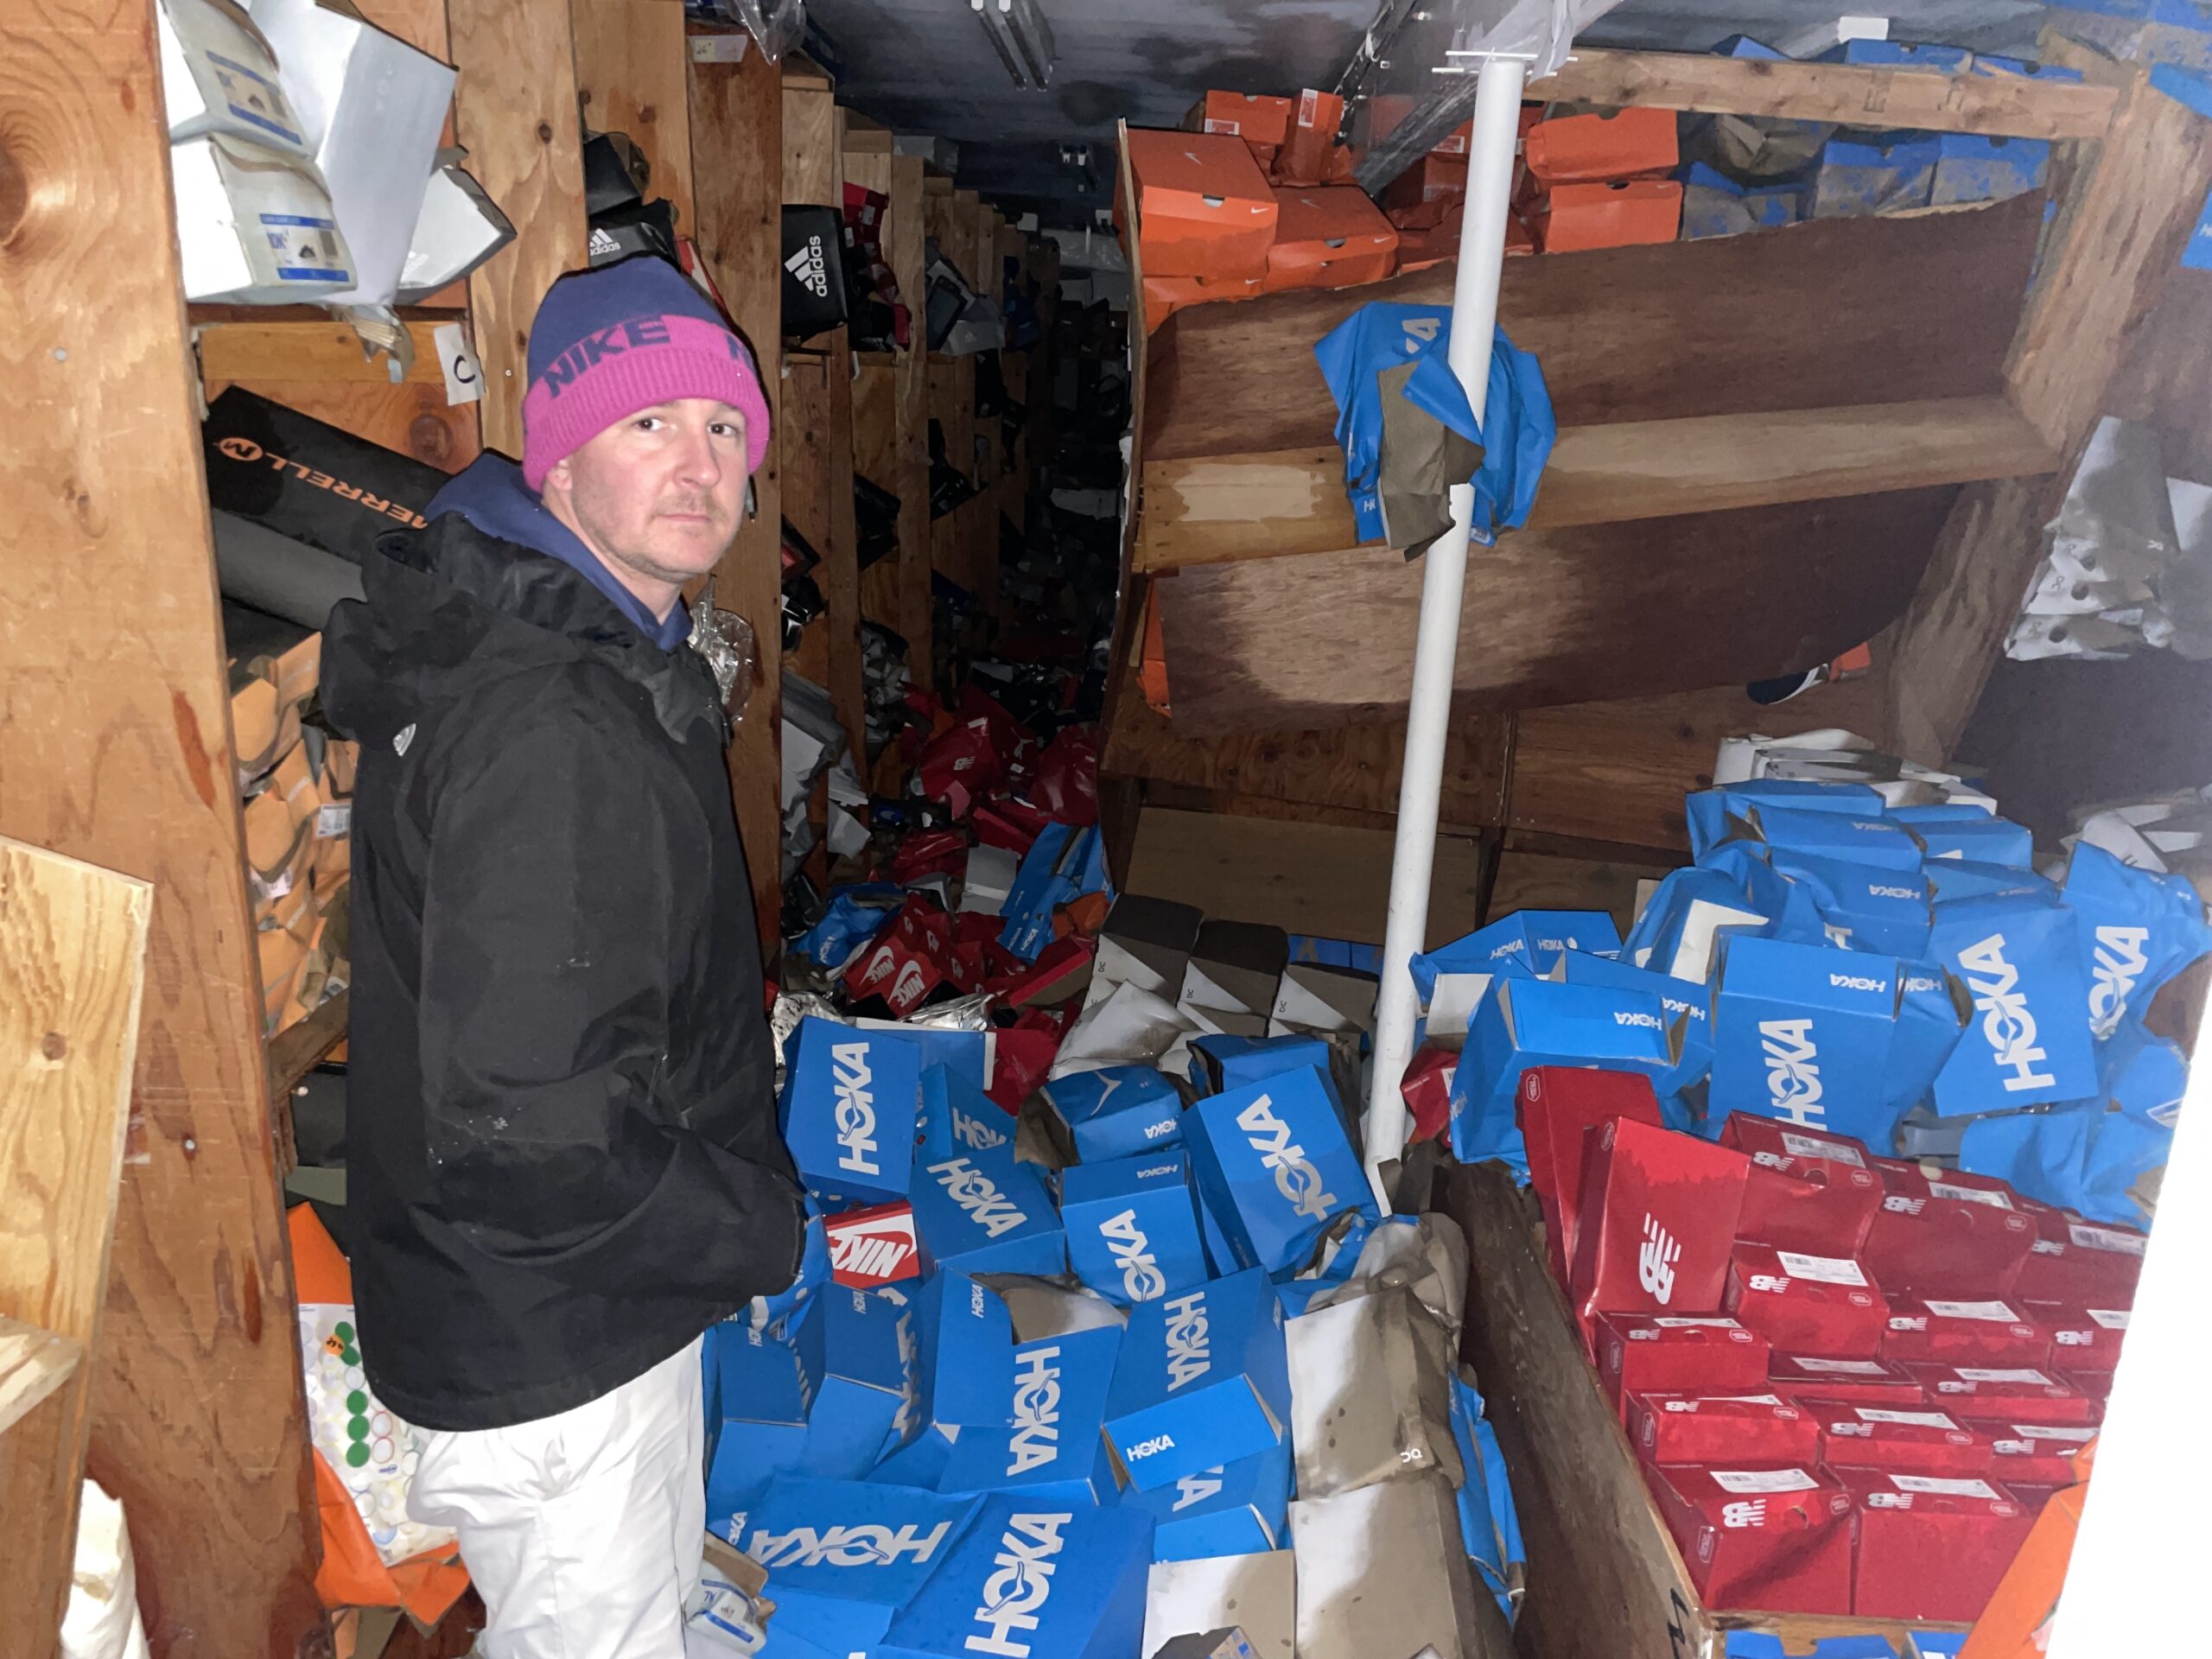 Geary Gubbins in the basement of his family's sporting good shop. Thousands of pairs of shoes will have to be discarded from the store's basement.
Michael Wright